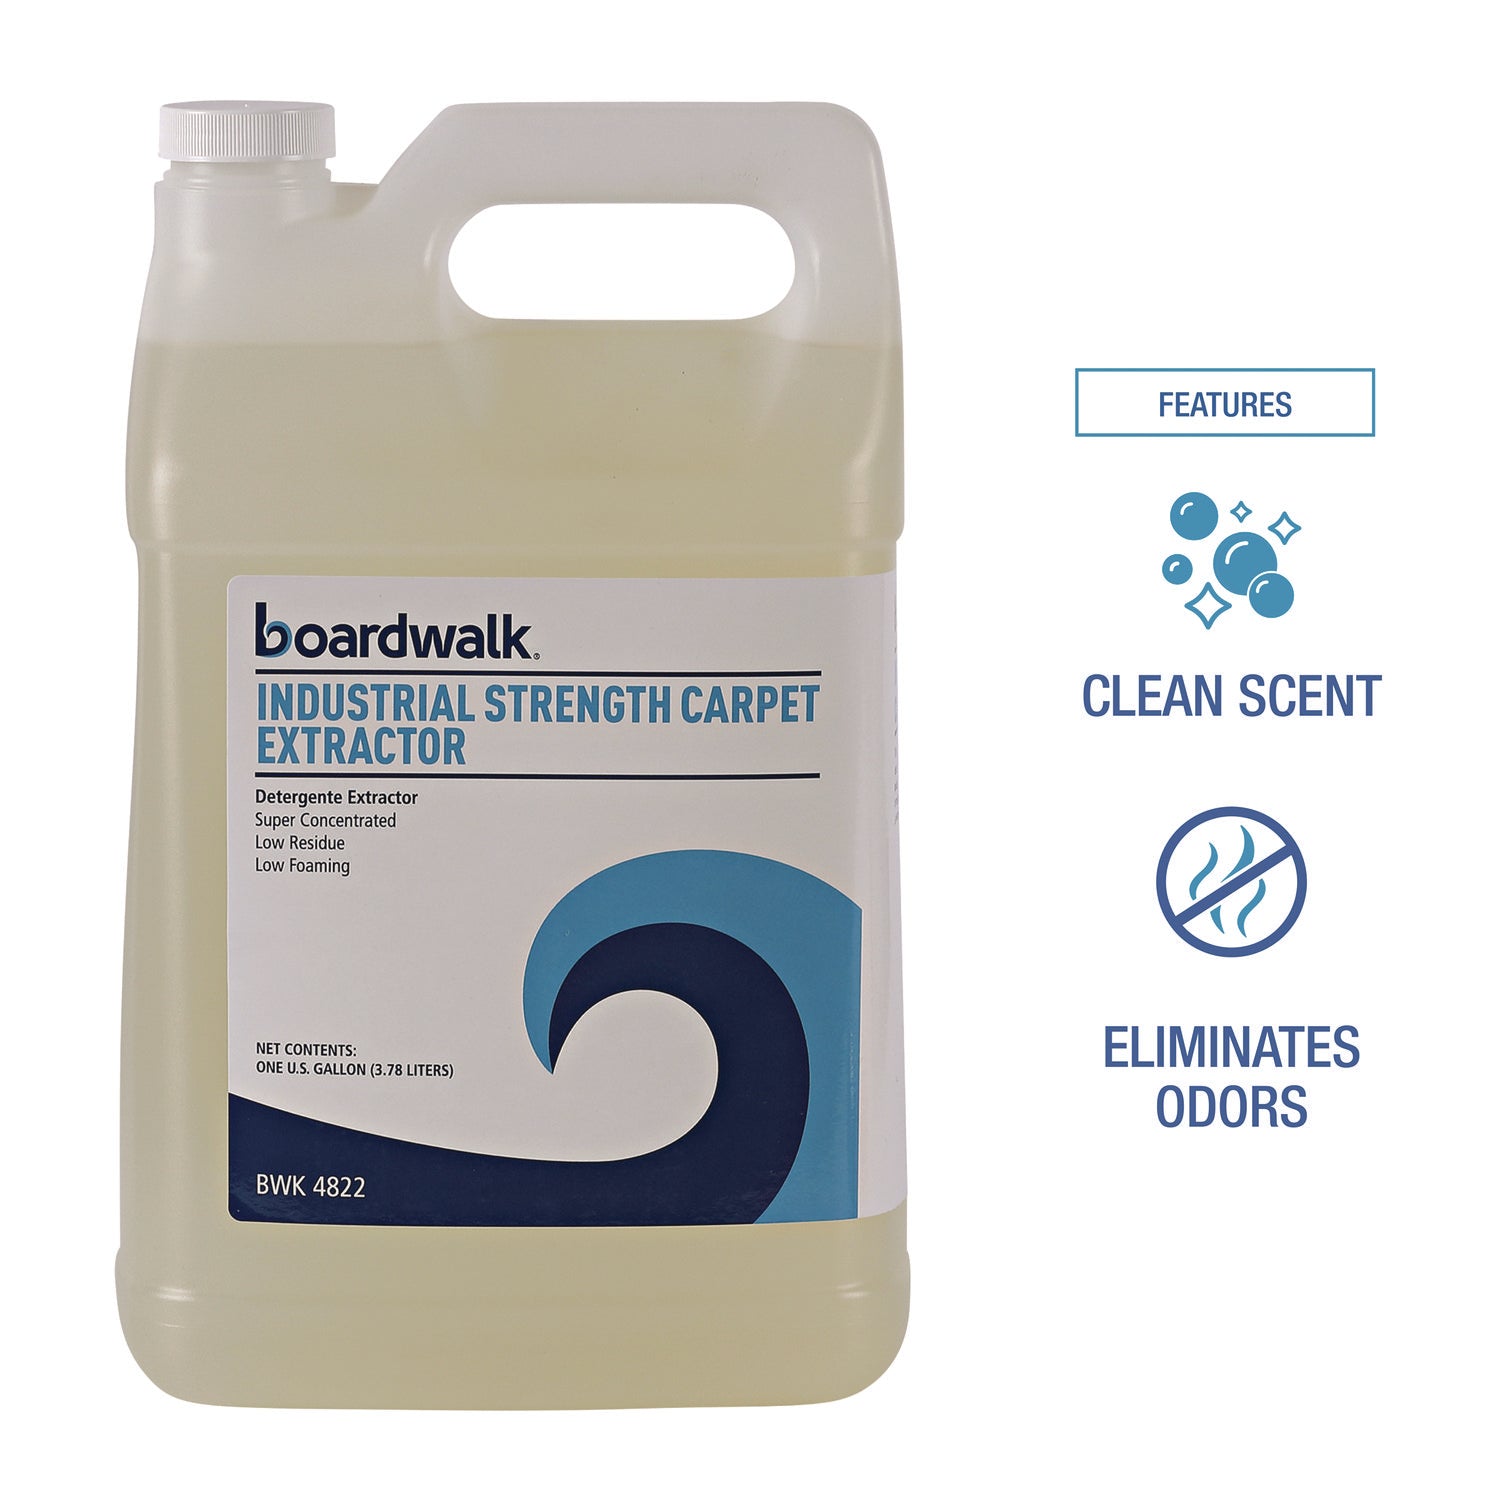 industrial-strength-carpet-extractor-clean-scent-1-gal-bottle-4-carton_bwk4822 - 3